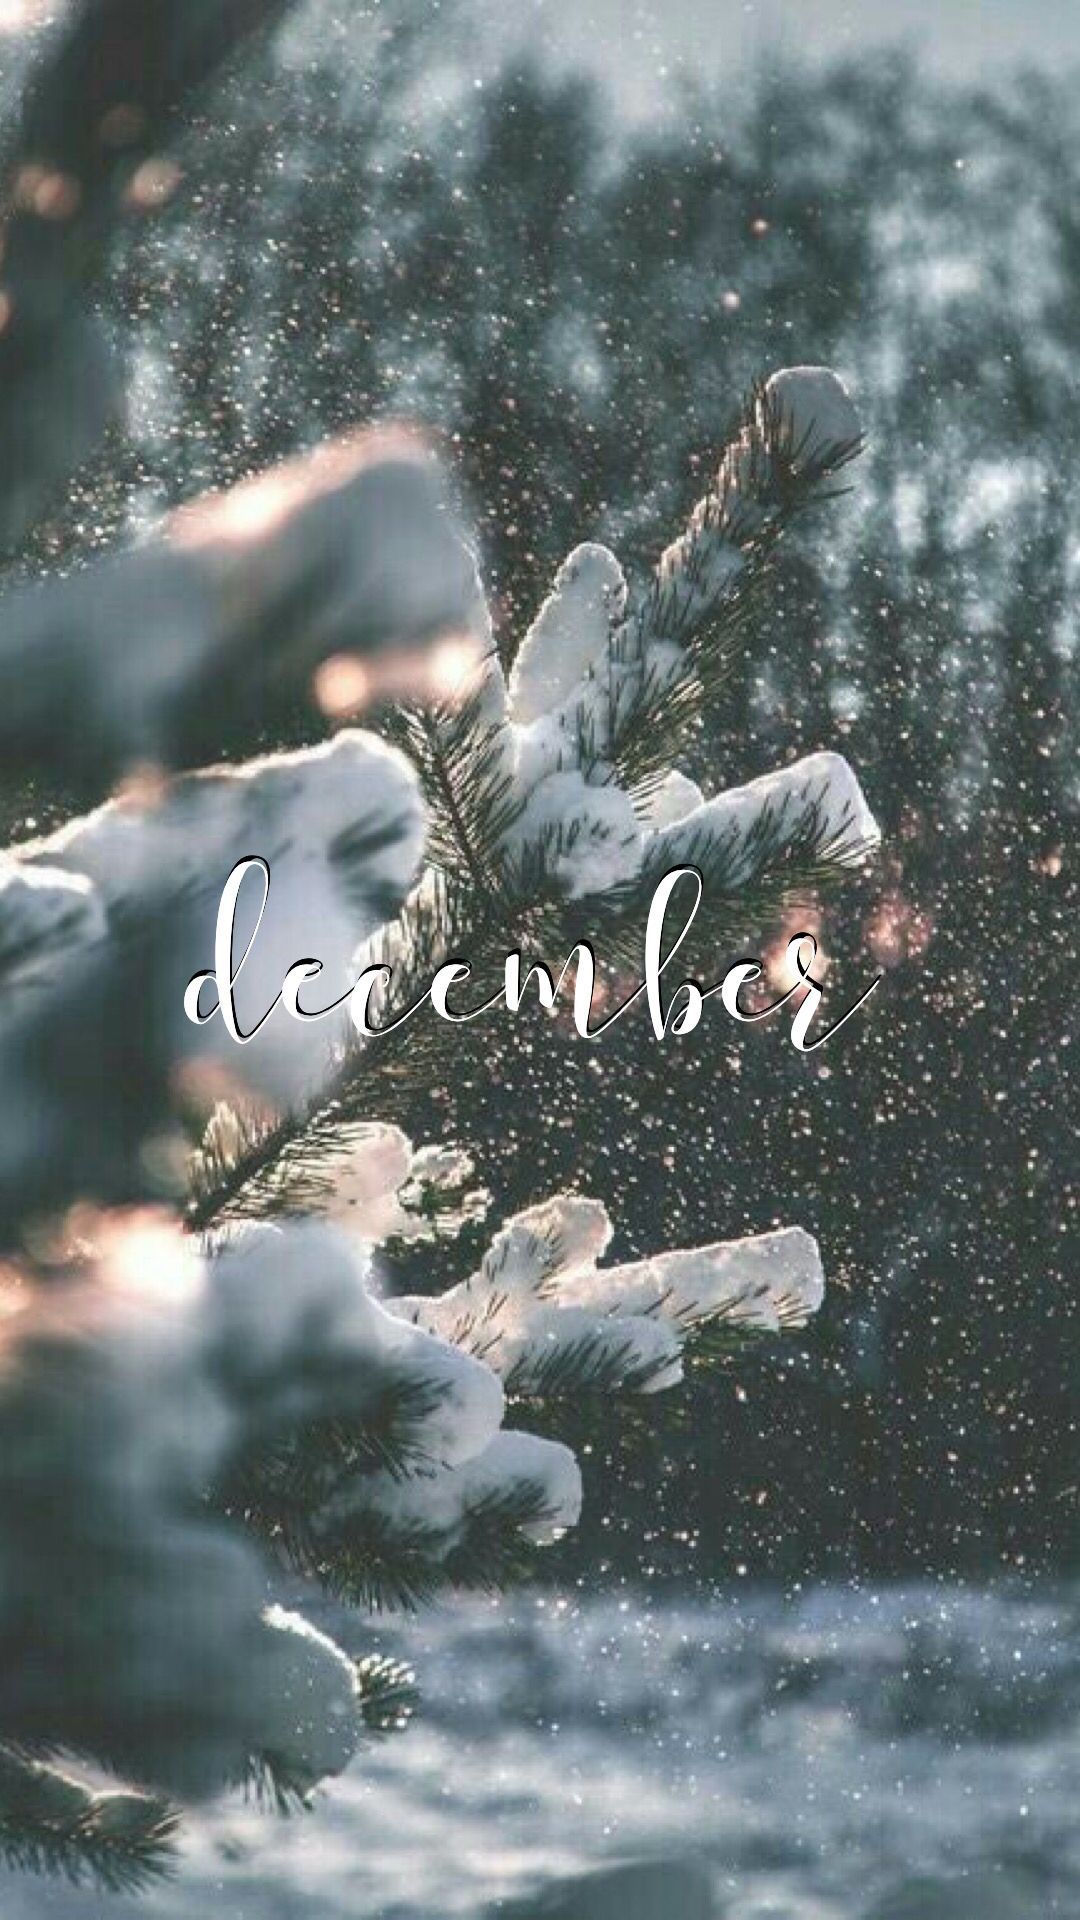 The snowy forest with a quote that says december - December